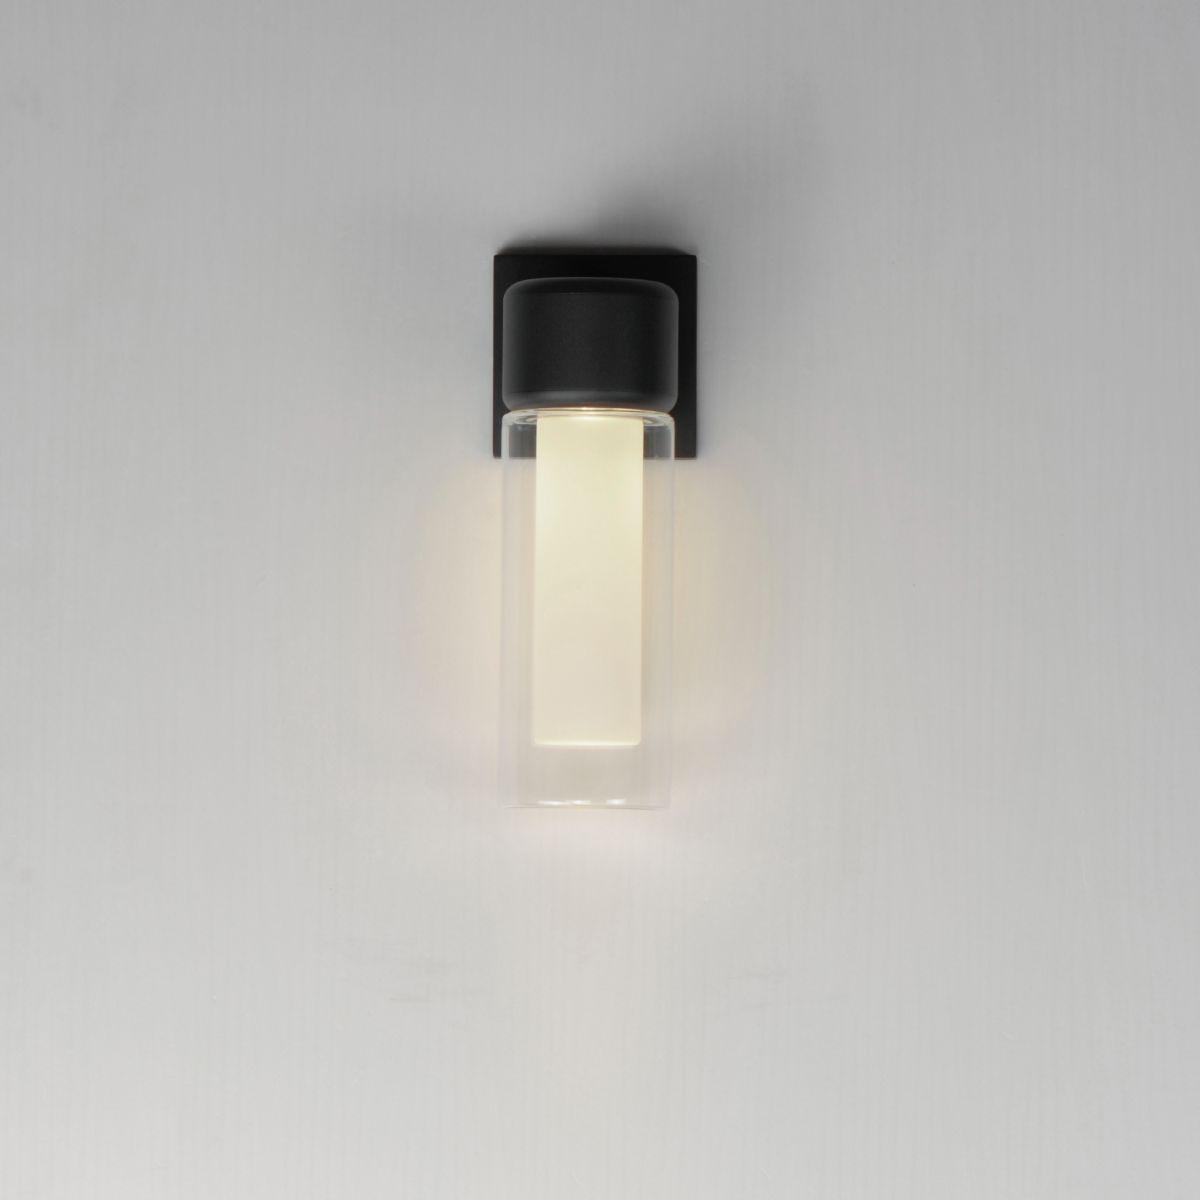 Dram 12 in. LED Outdoor Wall Sconce Black Finish